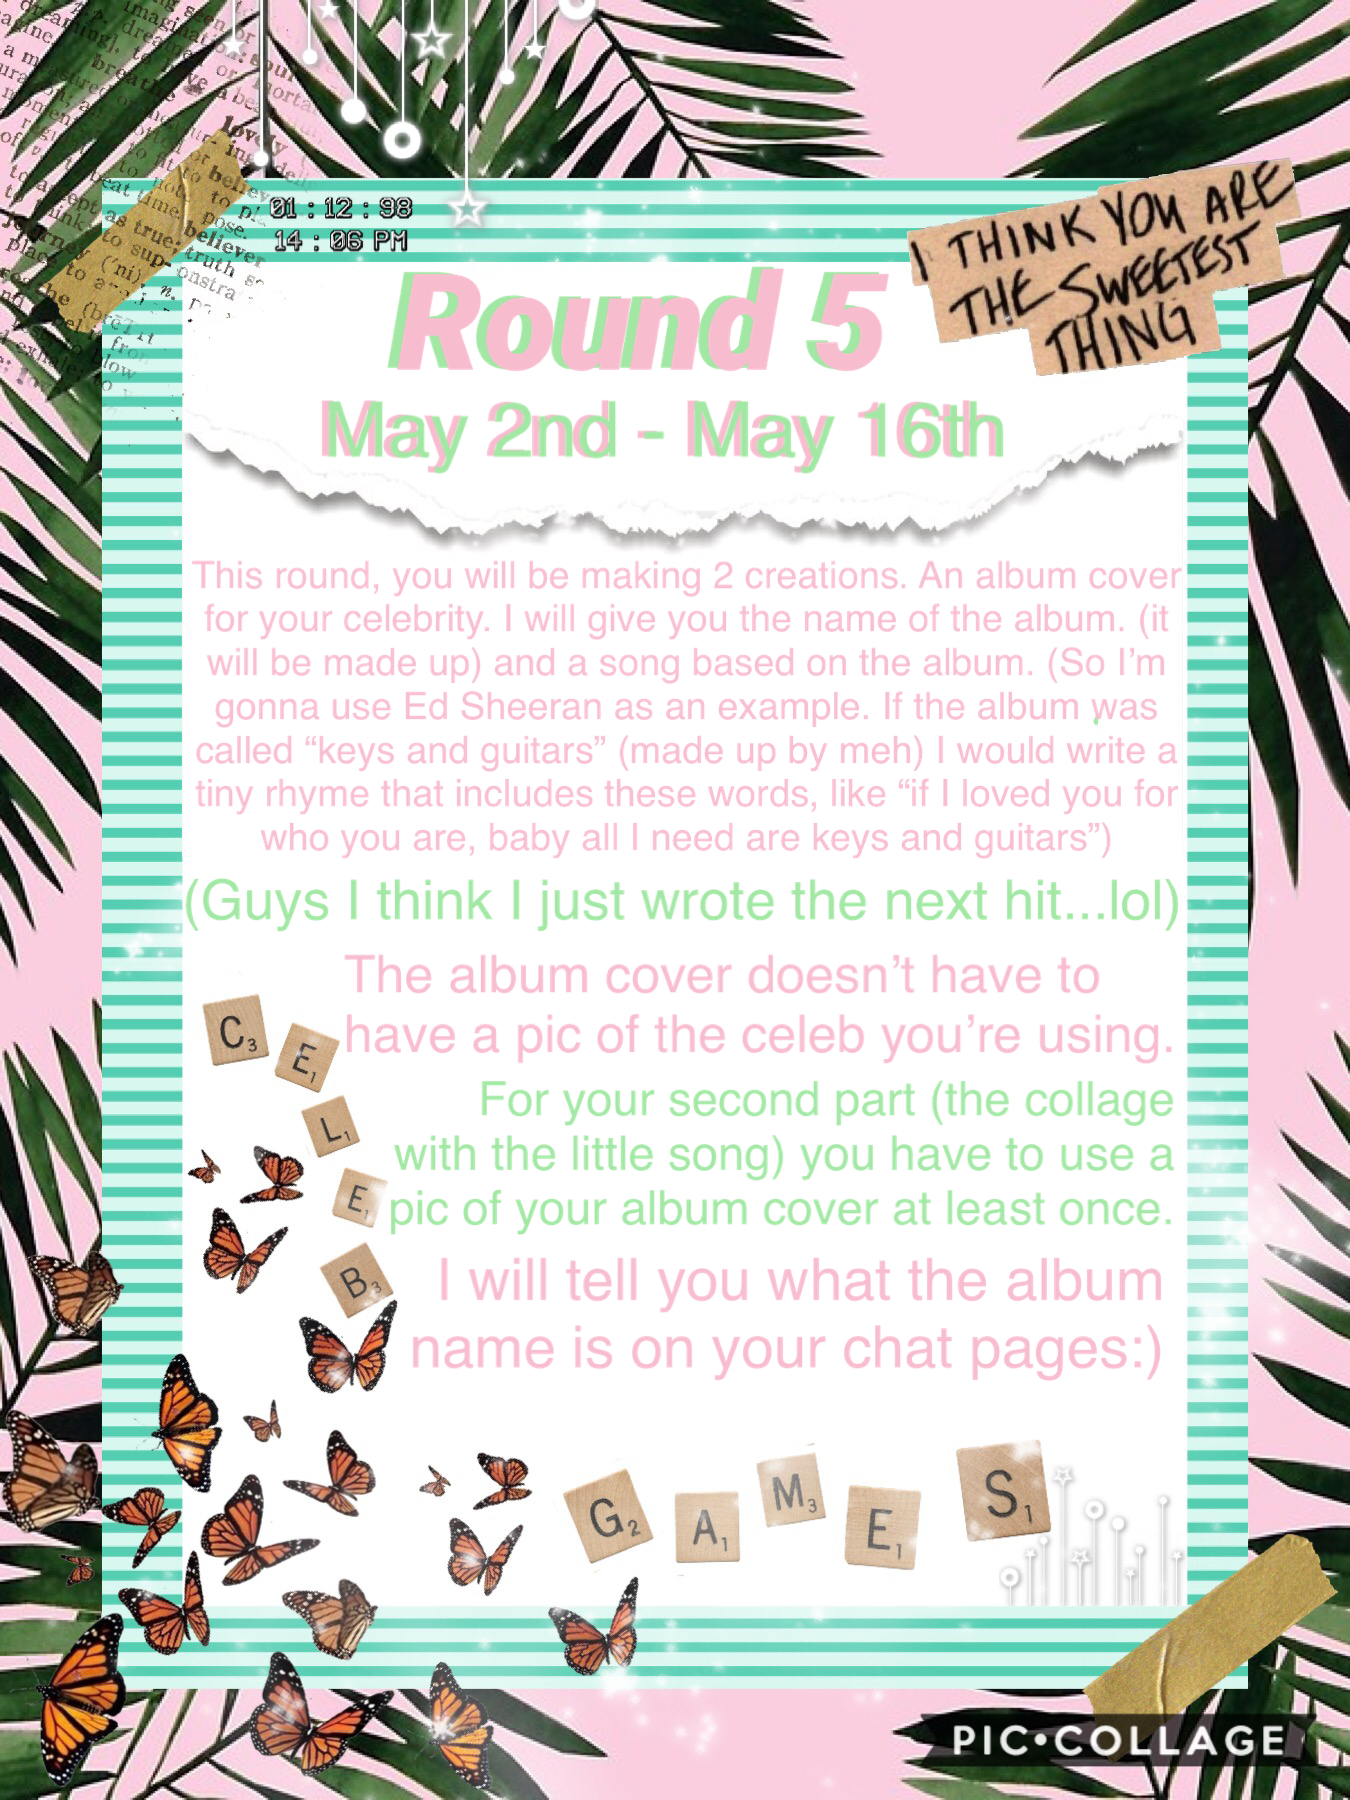 🚨‼️⚠️IMPORTANT TAP⚠️‼️🚨
So there’s round 5! Best of luck on it:)
Since you have two tasks, I’m giving you
two weeks:) I can’t wait to see your two entries!
Chat pages will be out very very very soon!